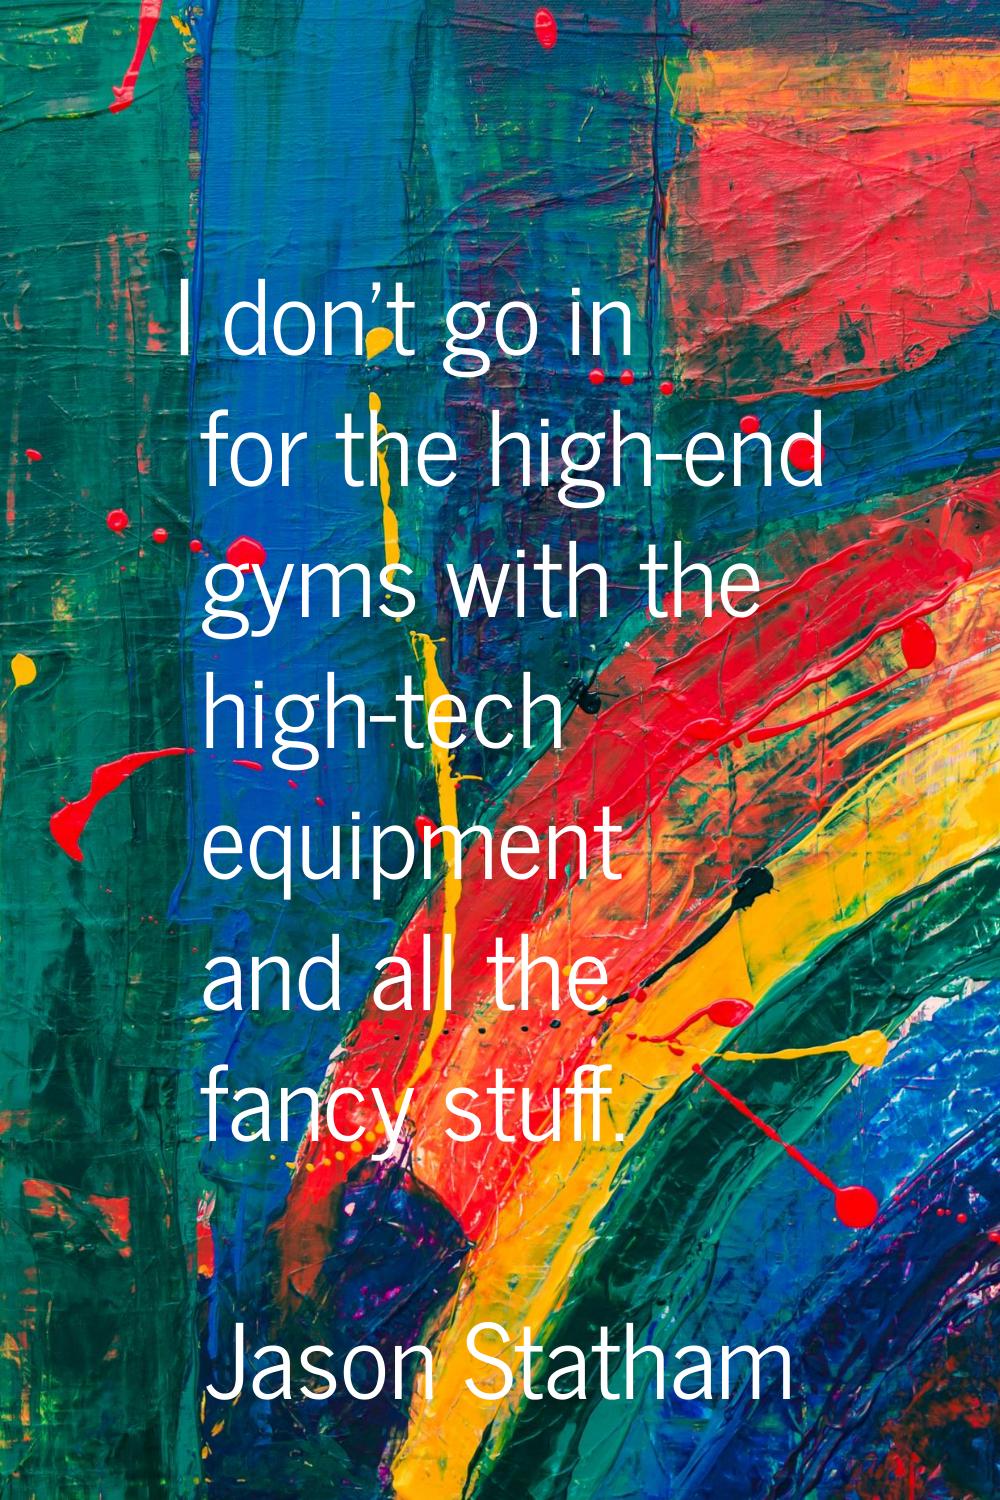 I don't go in for the high-end gyms with the high-tech equipment and all the fancy stuff.